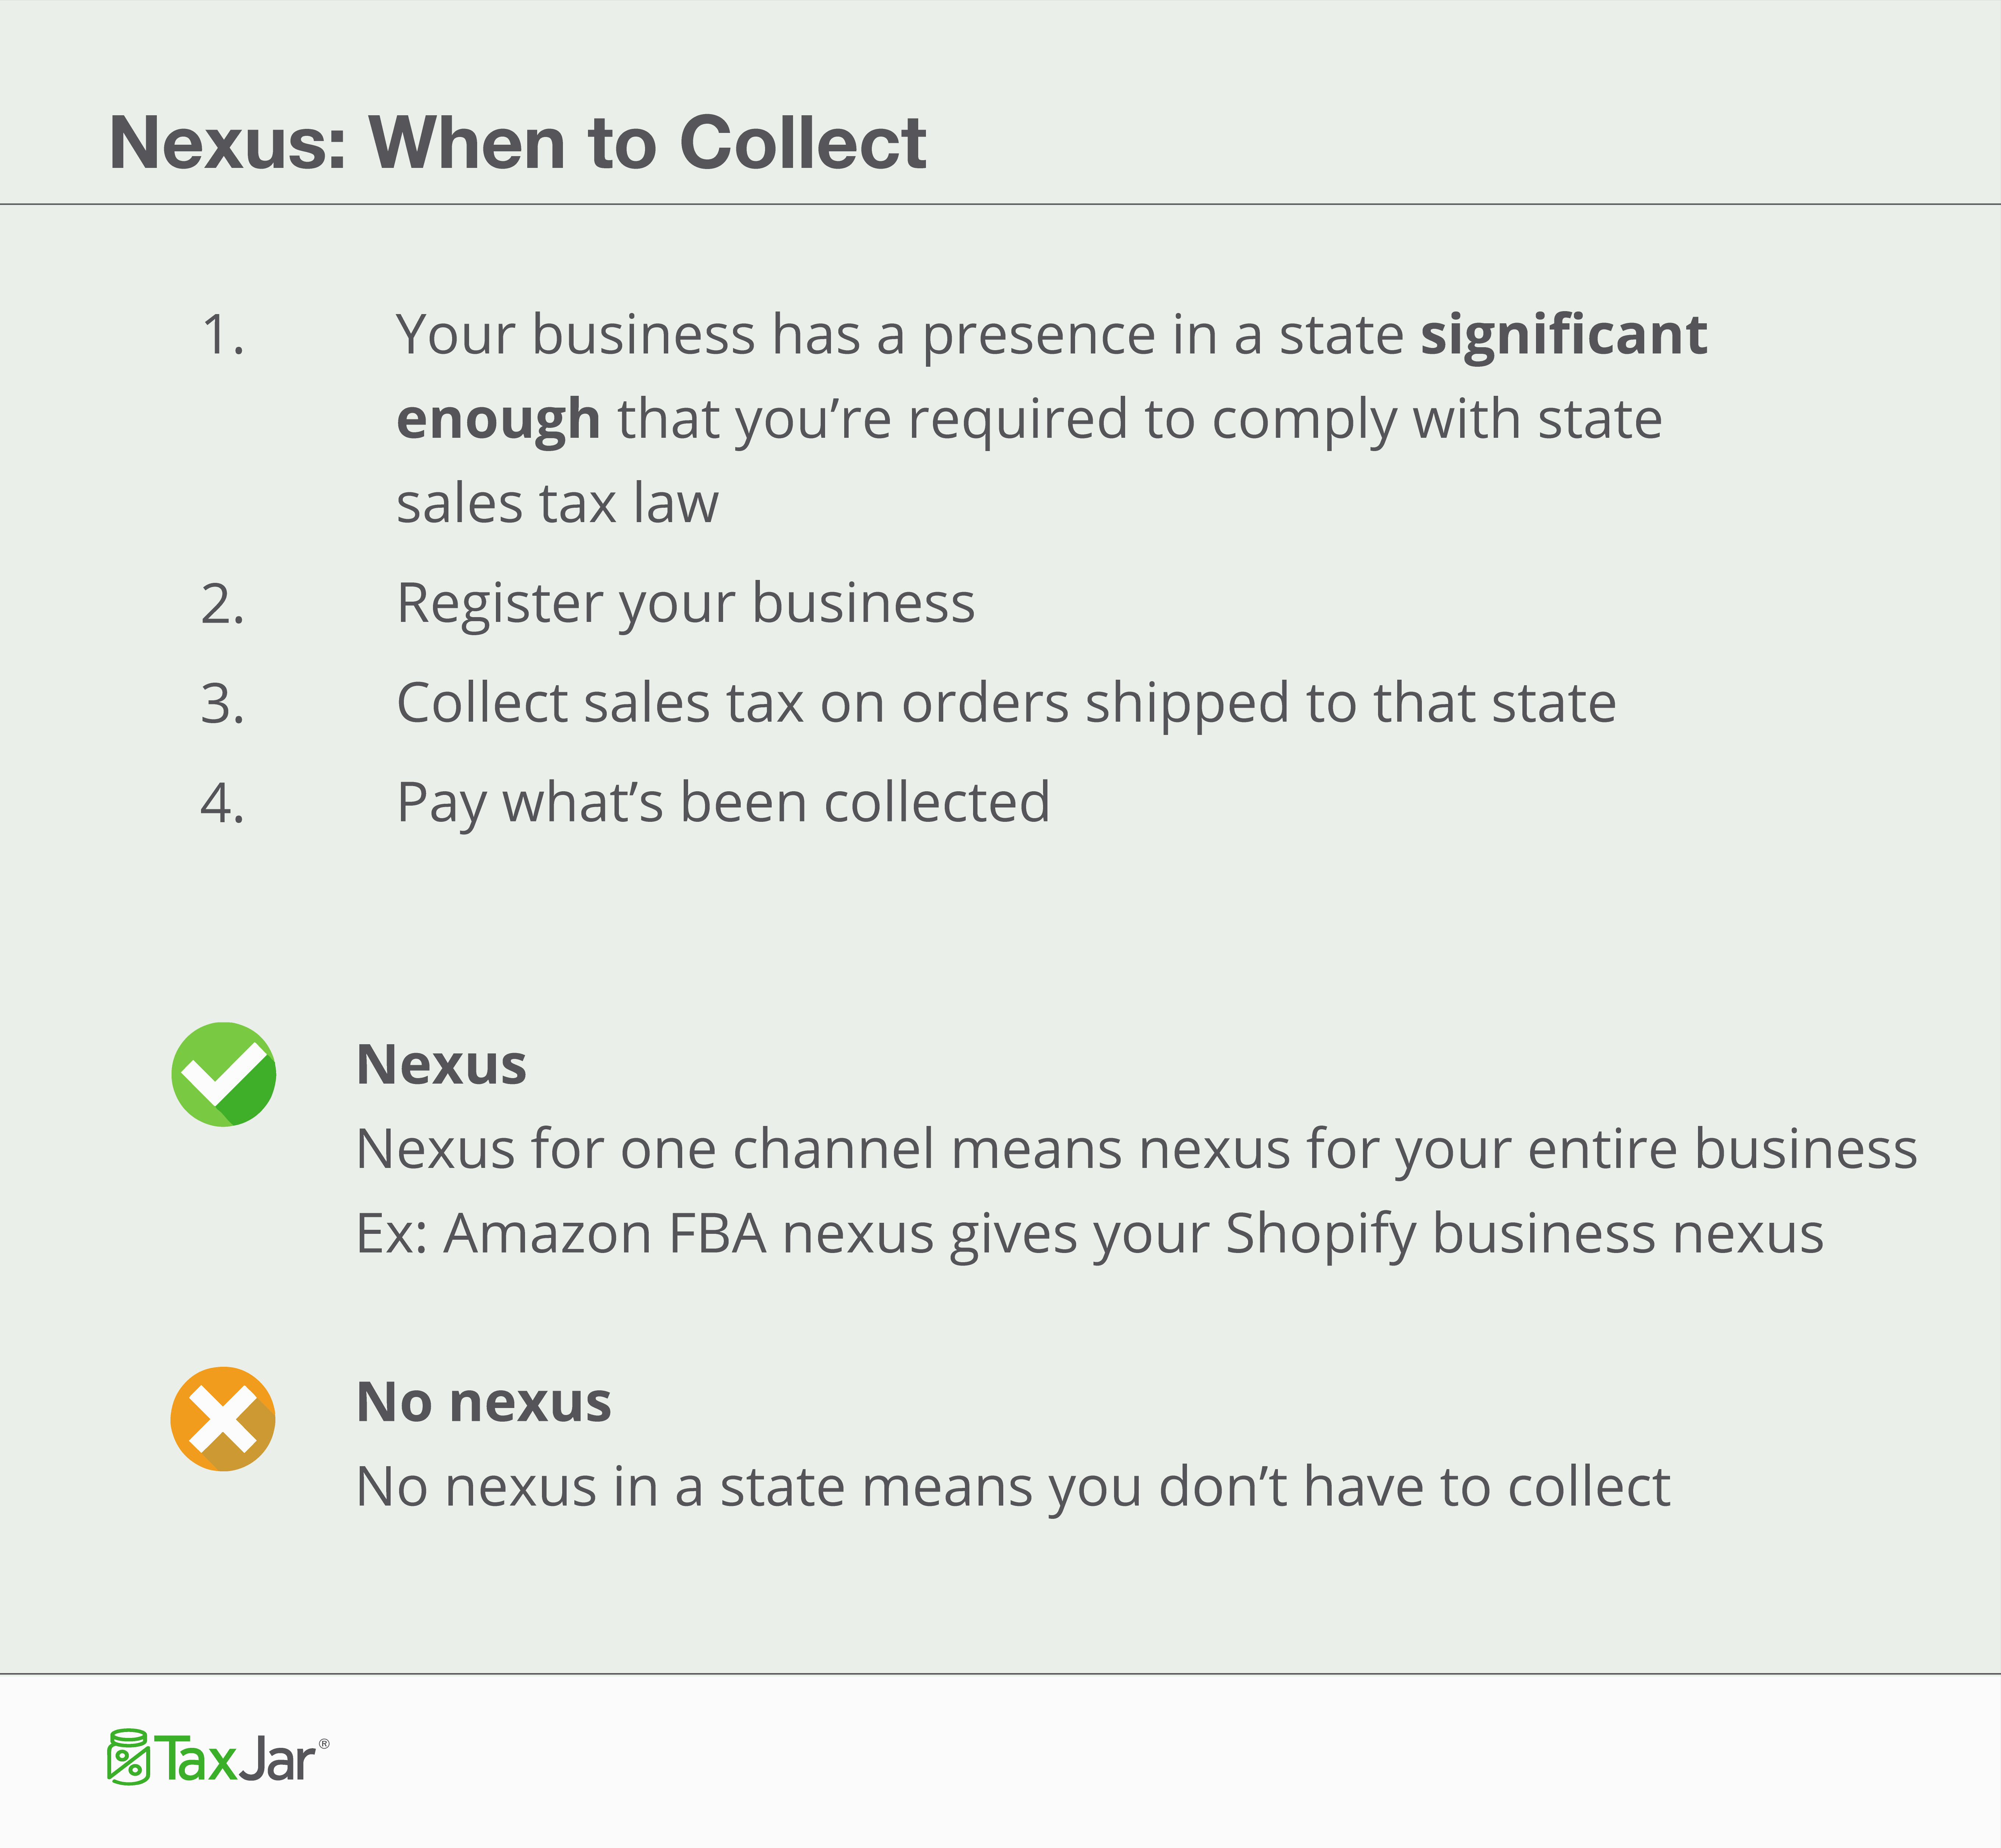 When to collect nexus infographic